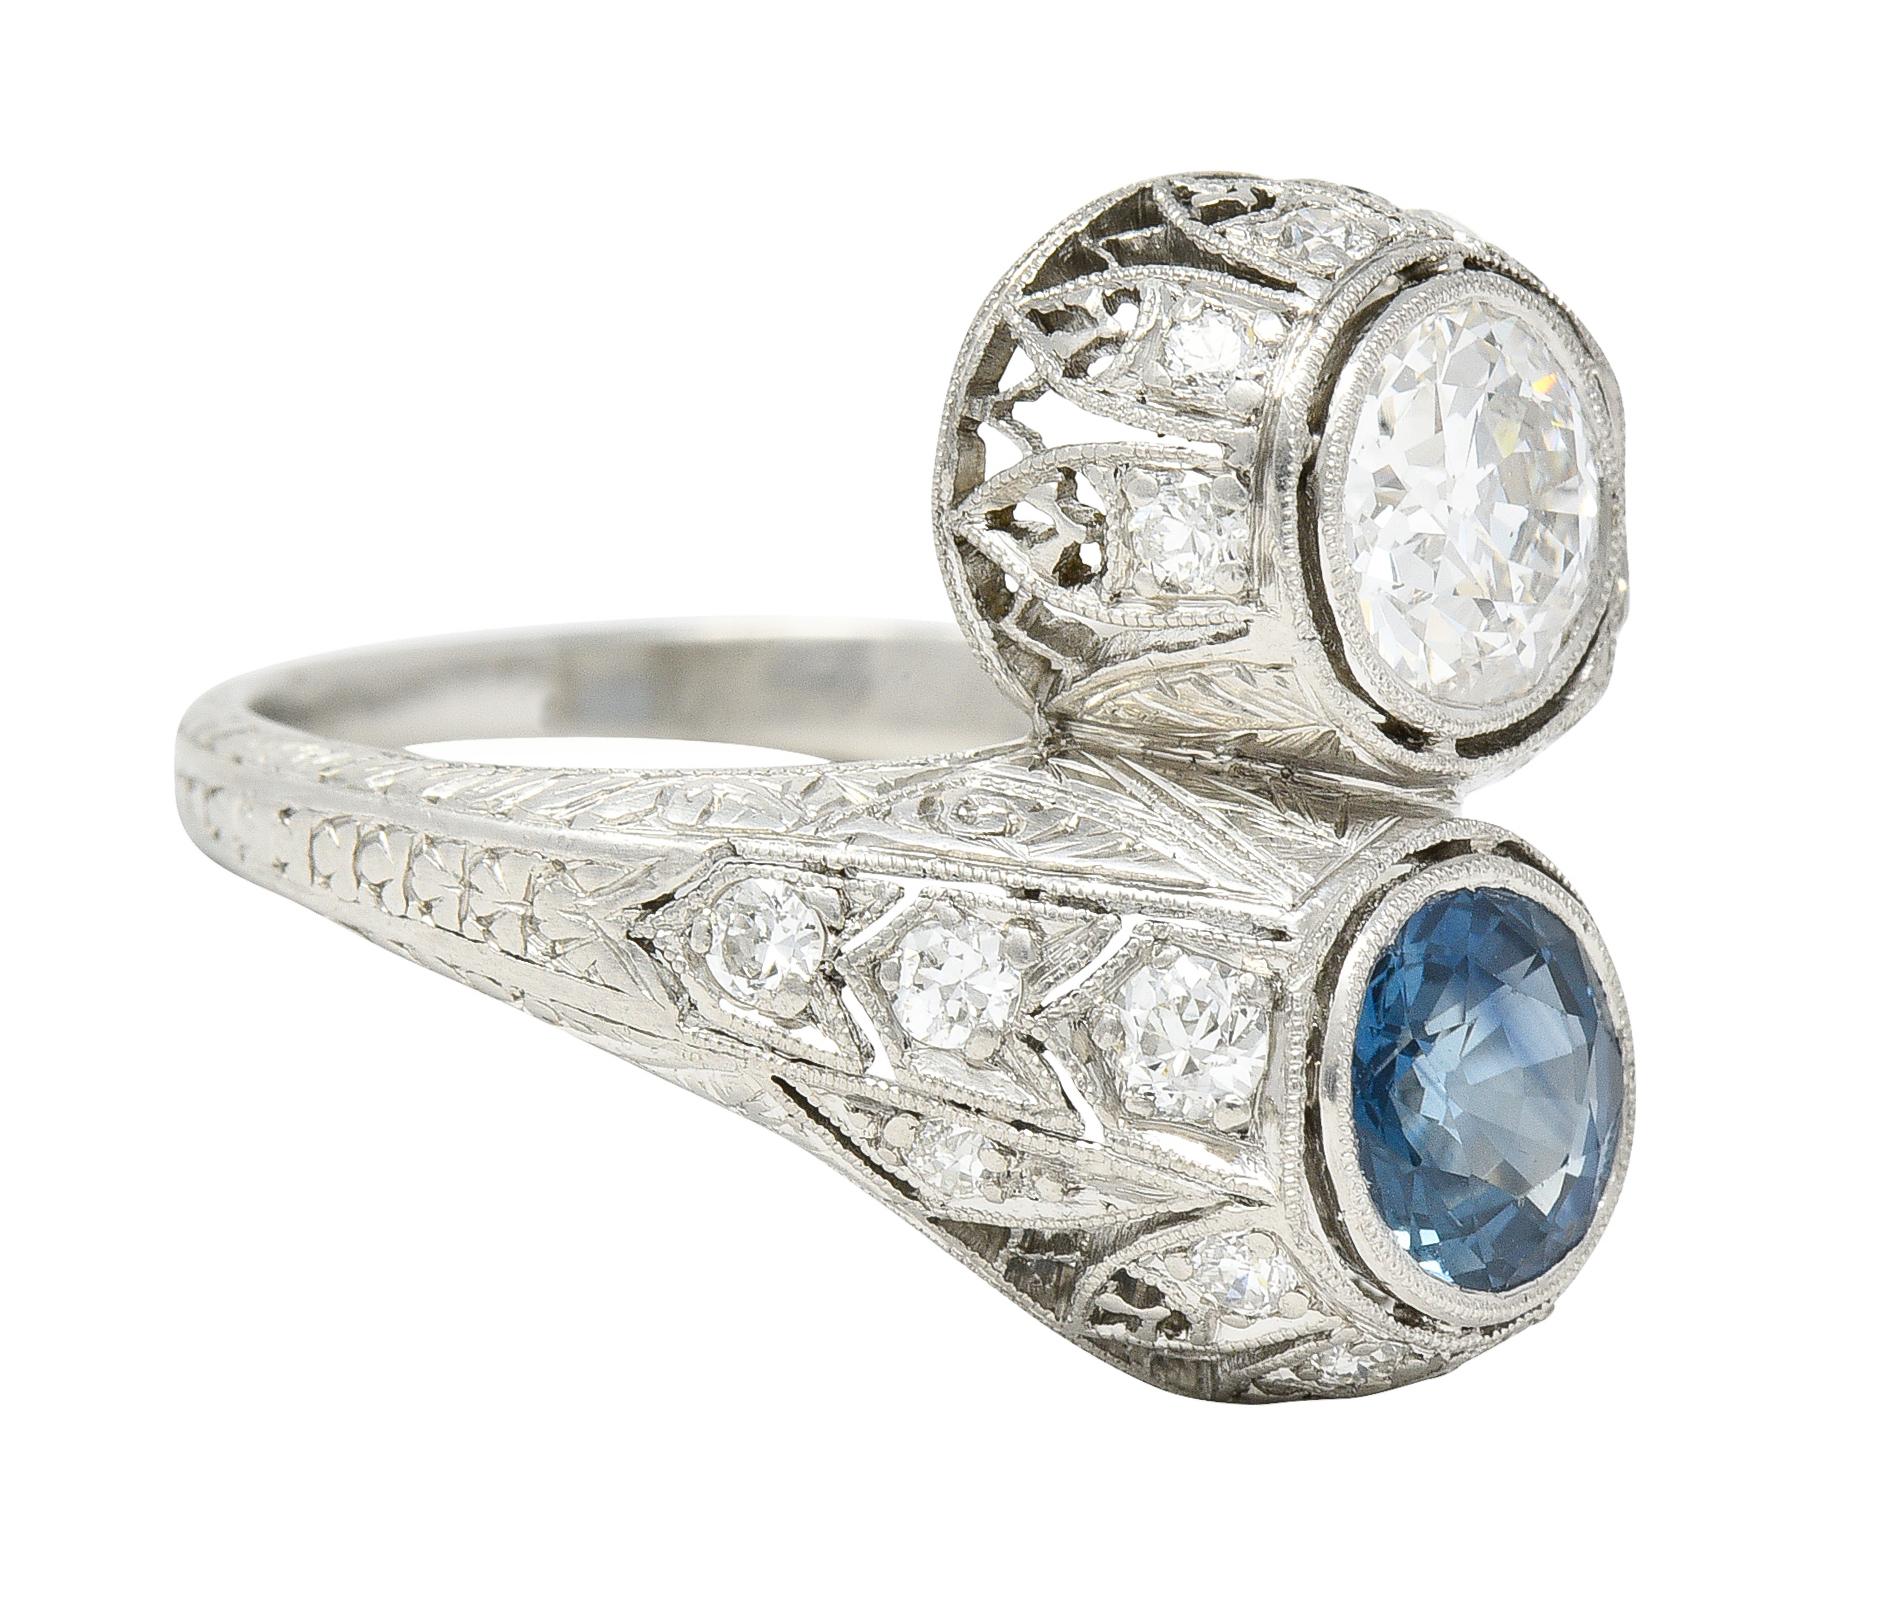 Designed as a bypass style ring terminating with an old European cut diamond and round cut sapphire
Old European cut weighs approximately 0.91 carat - G color with SI1 clarity
Sapphire weighs approximately 0.97 carat - transparent light blue in